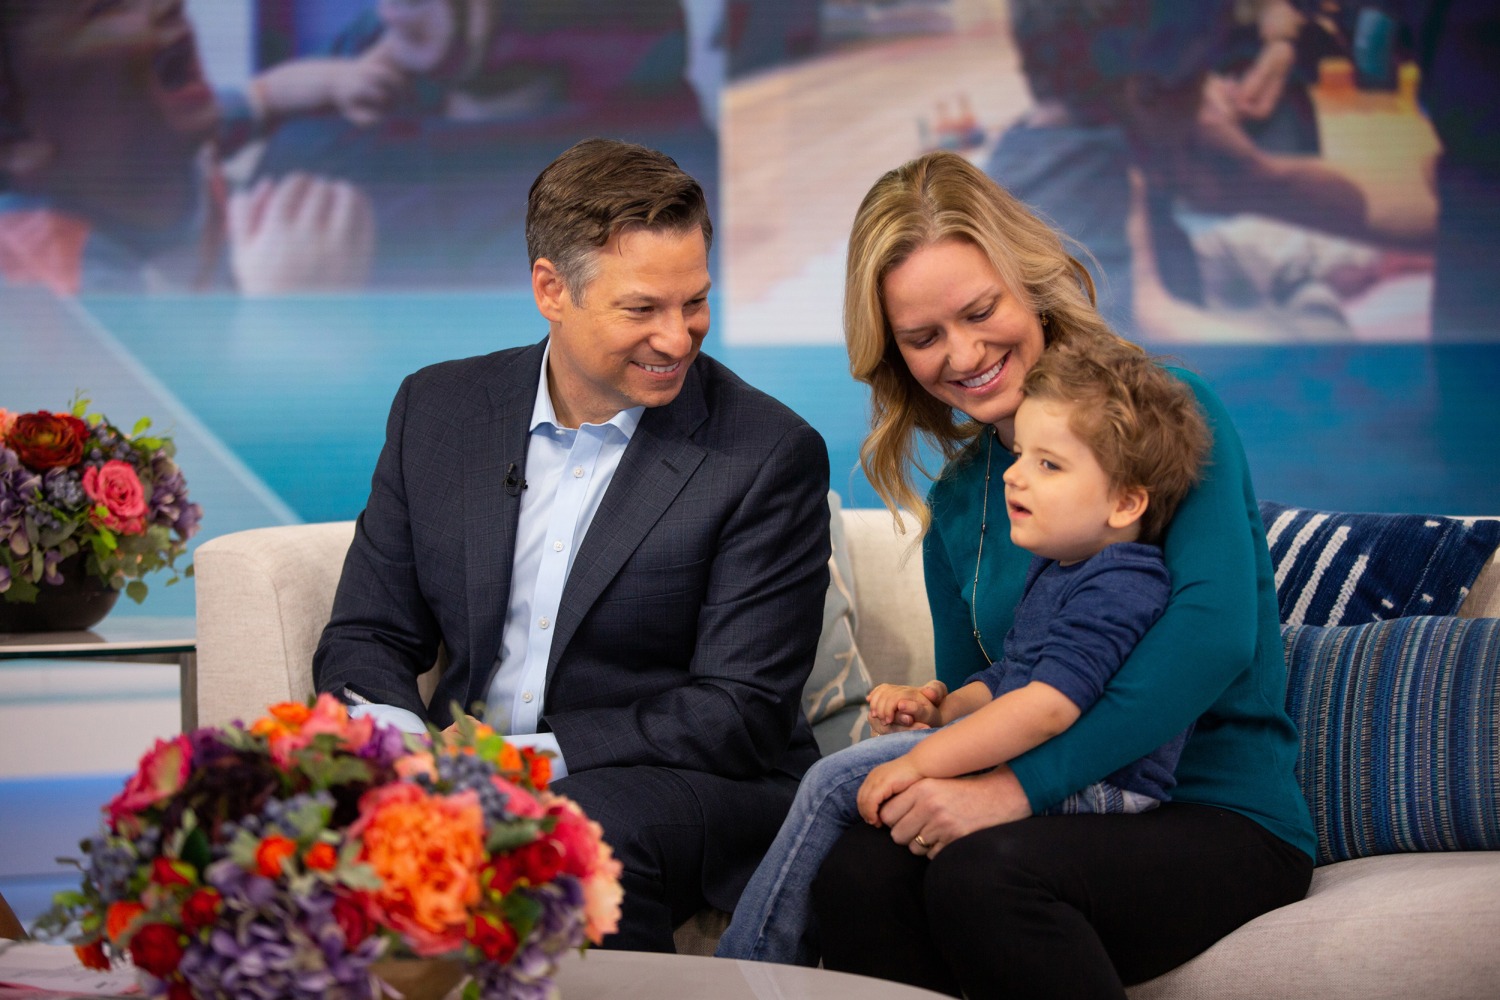 NBC News’ Richard Engel Says 6-Year-Old Son Henry Has Died